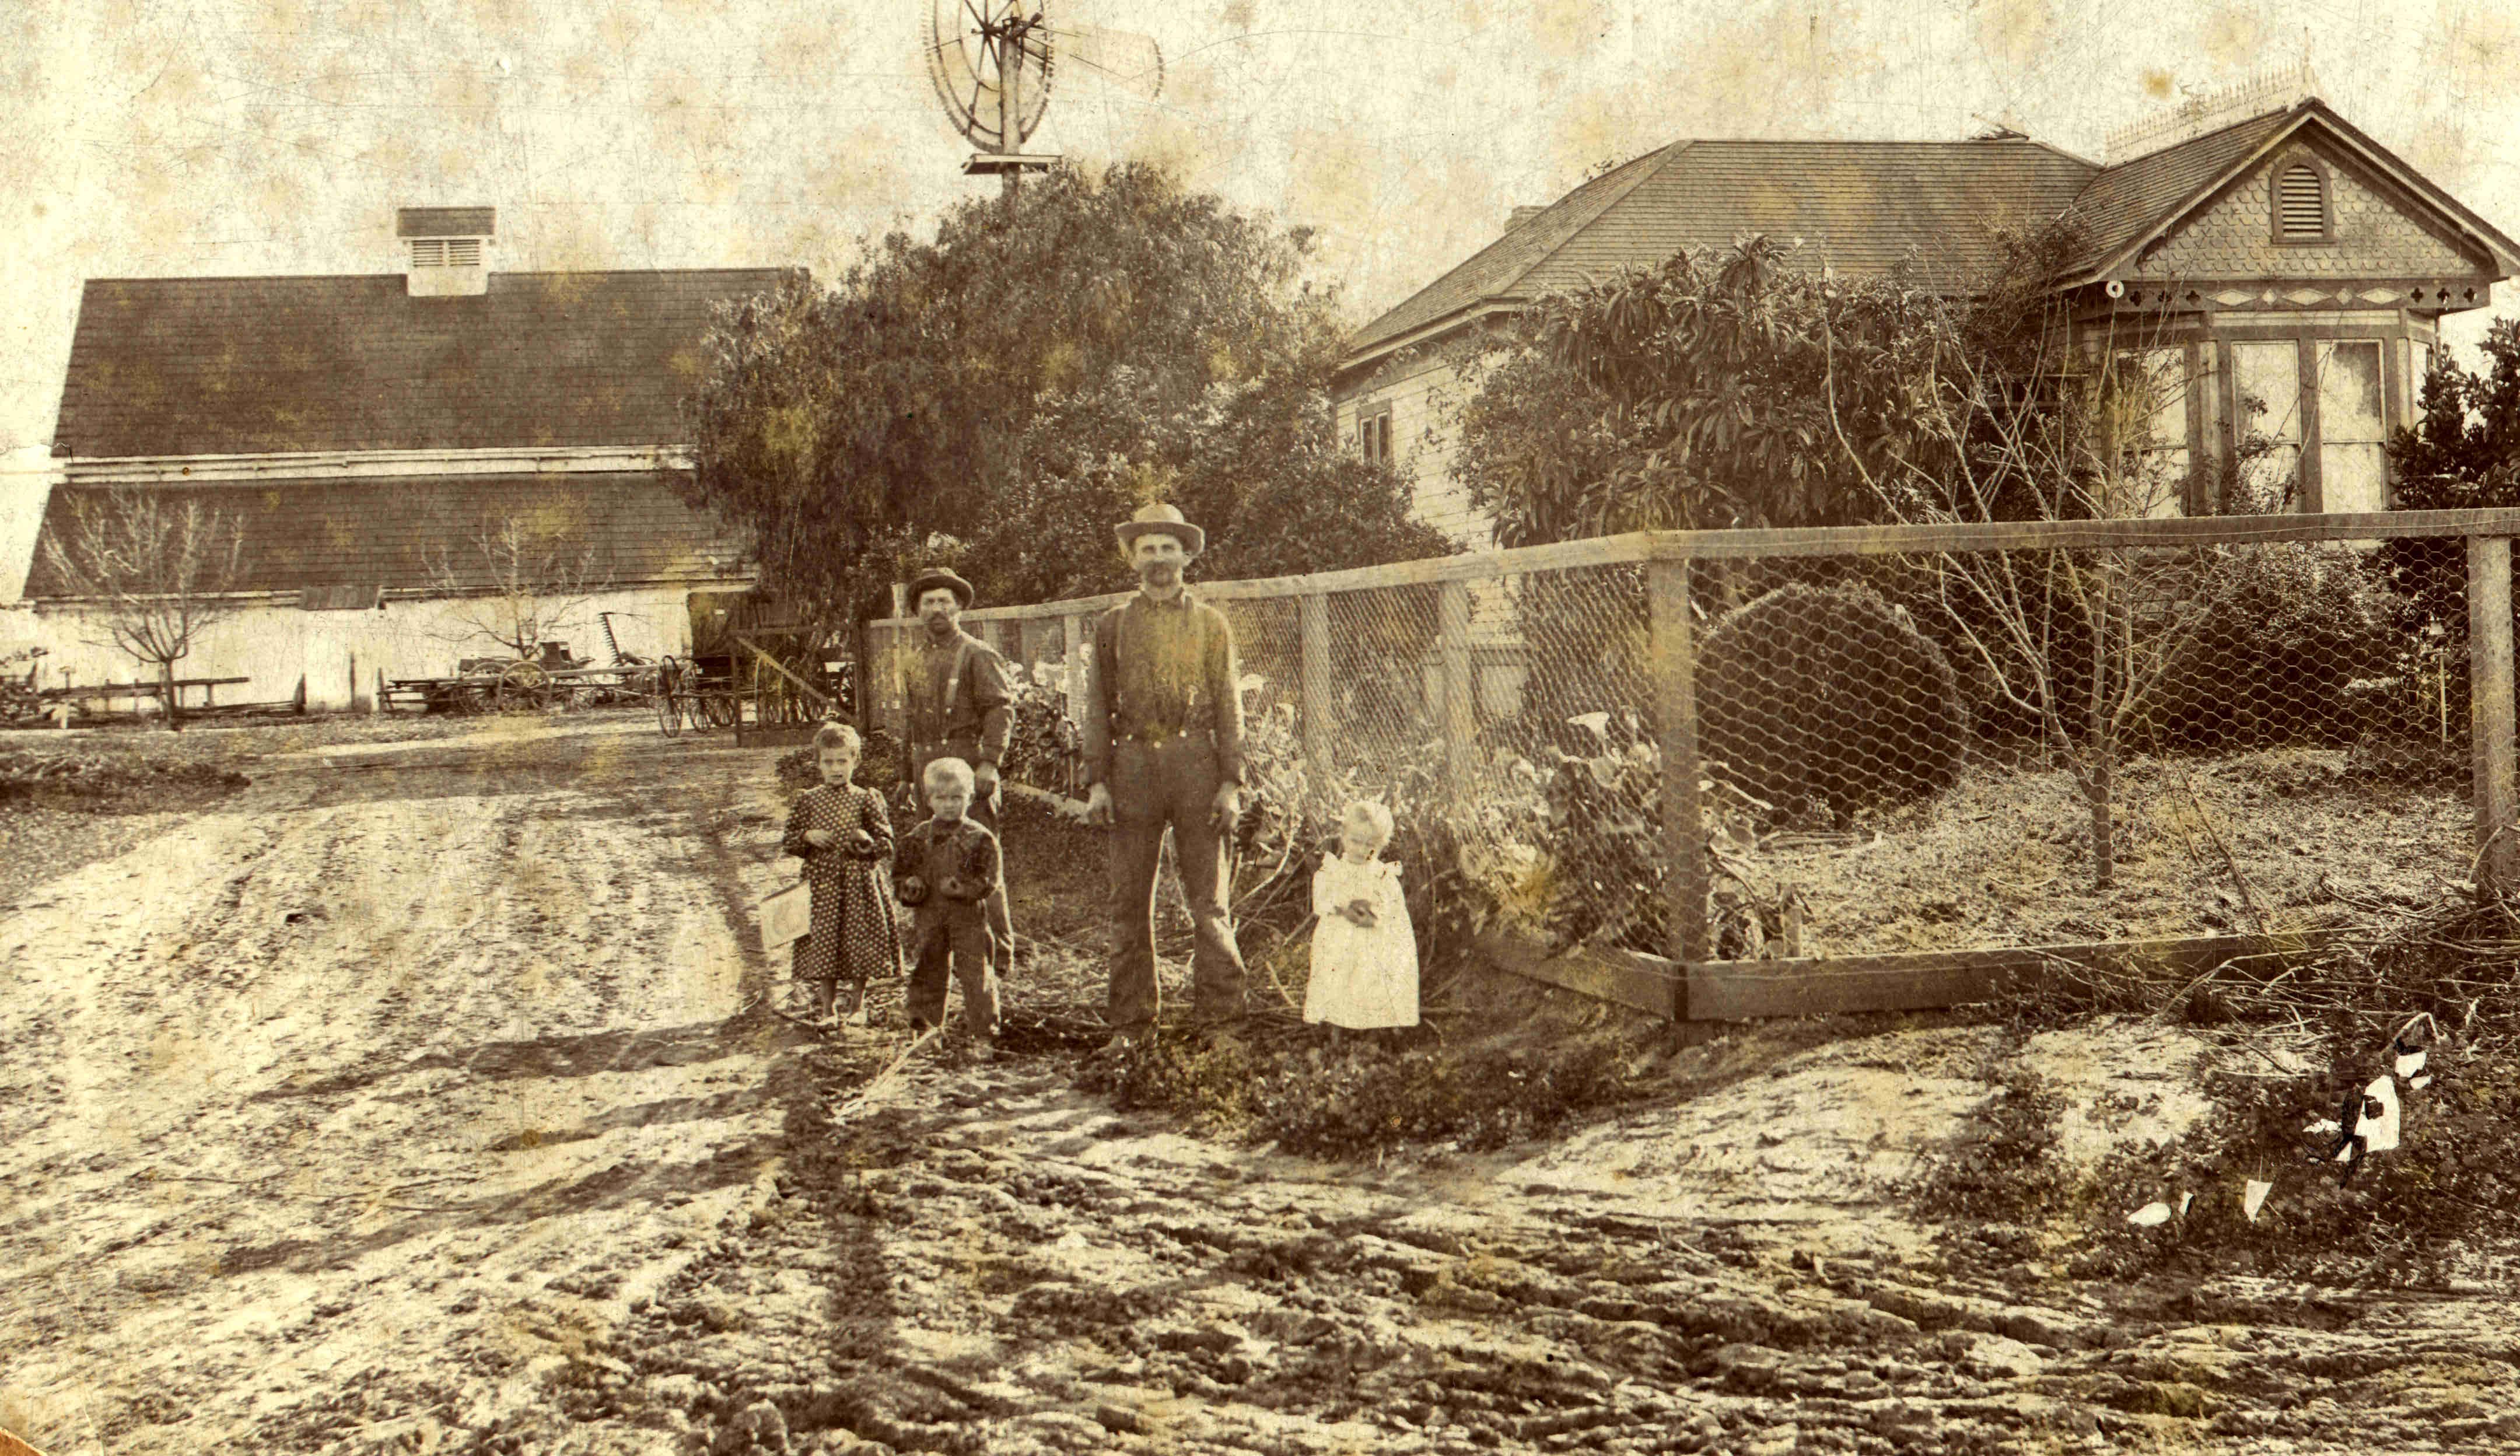 John Wagner's Farm House, Dated 1900, Located at 1730 W. Manchester Ave., City of Los Angeles, CA.  Left to right: the kids are Amanda, Irene, and Margaret.